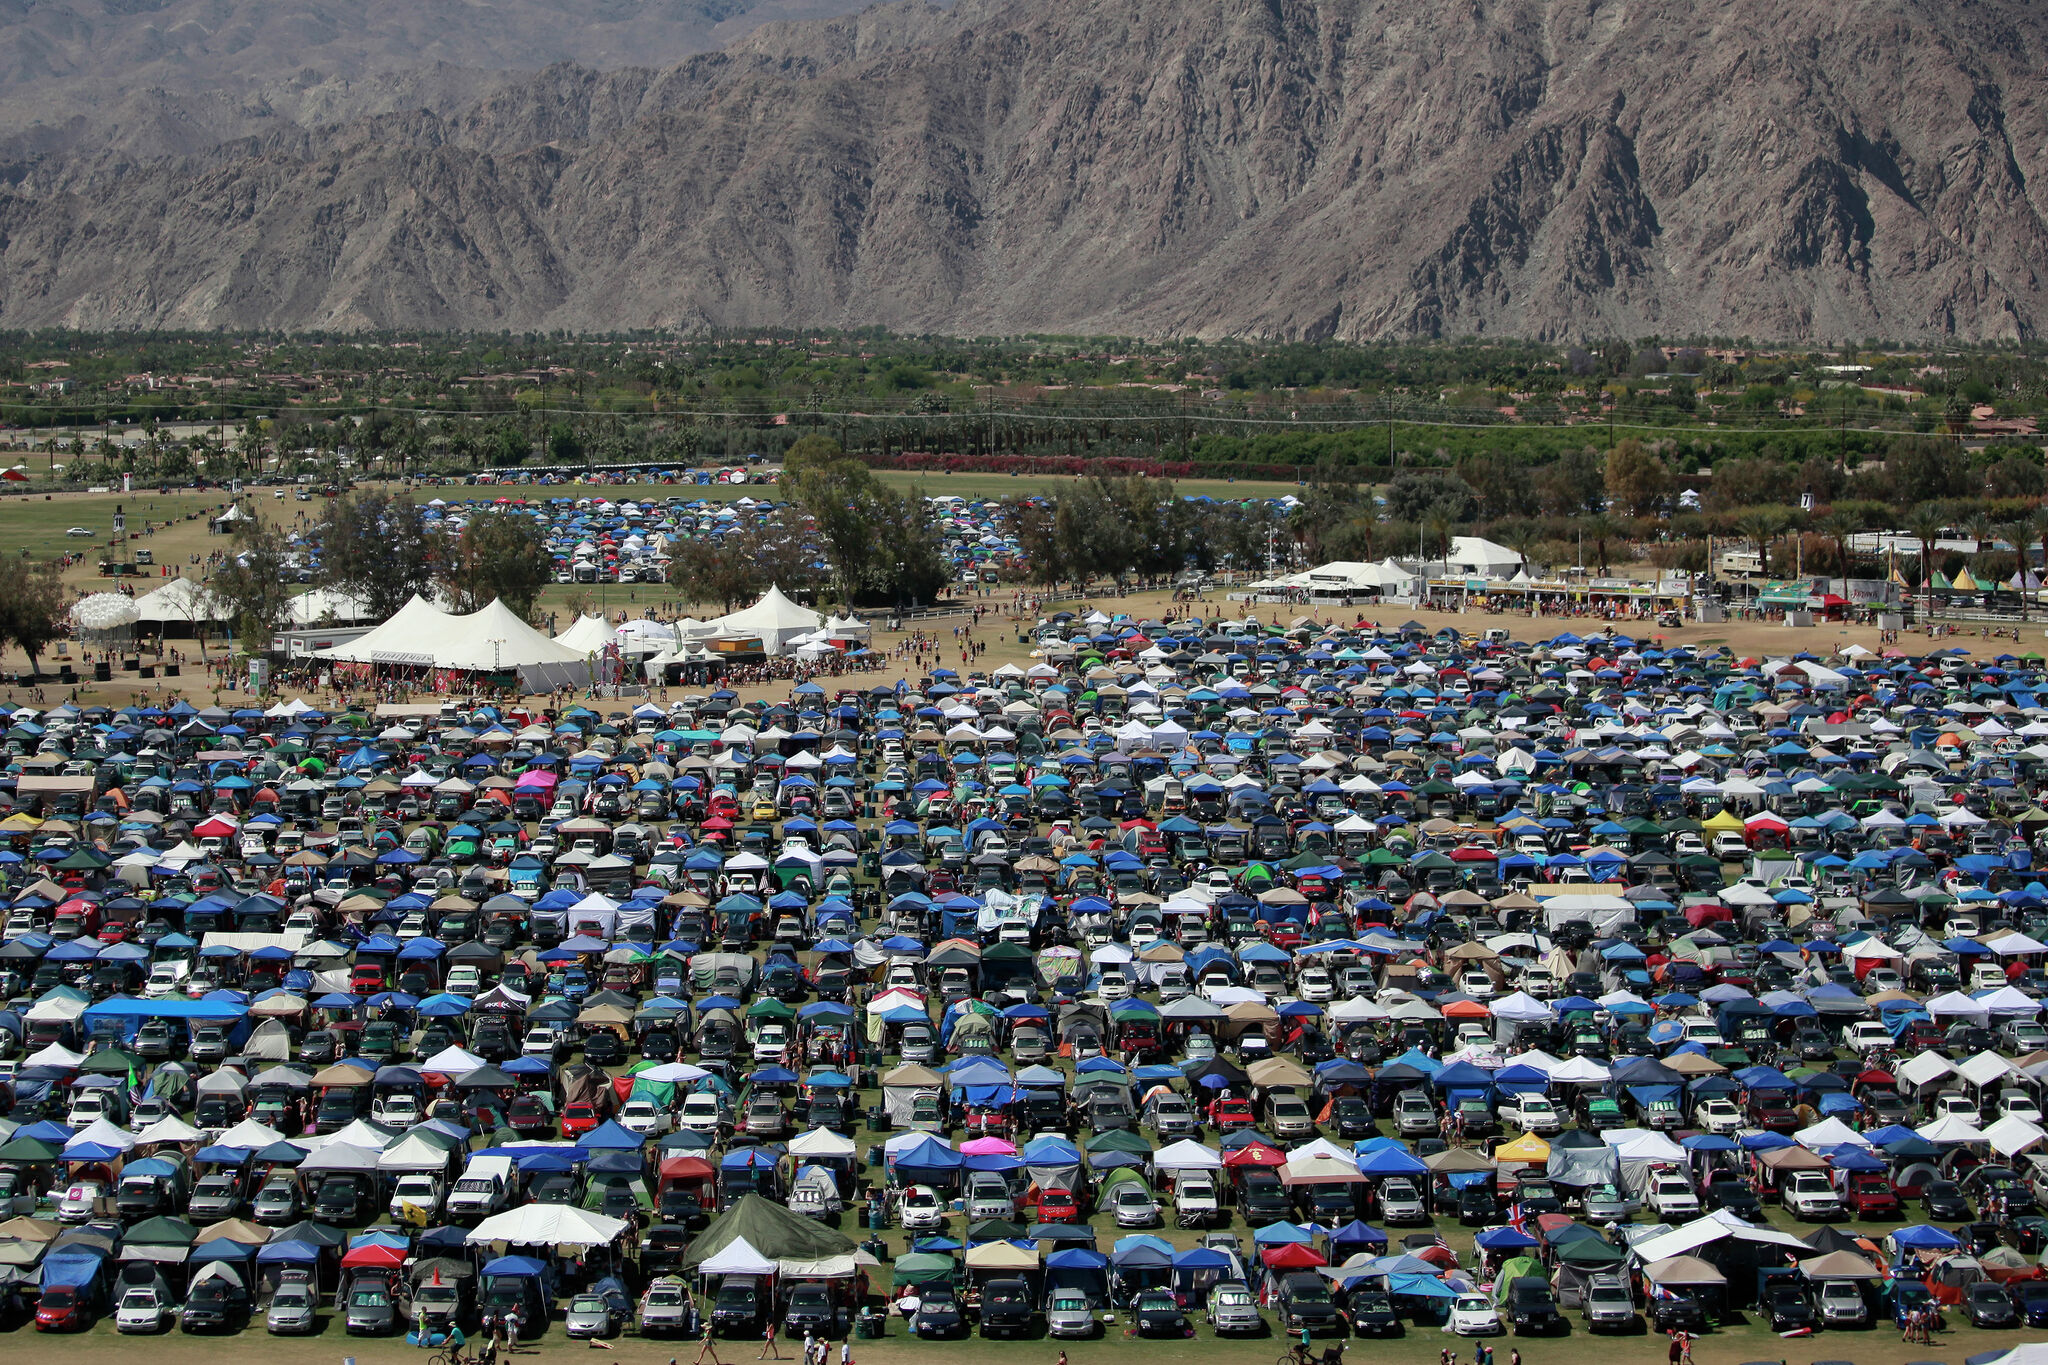 I camped at Coachella. And made a terrible mistake.